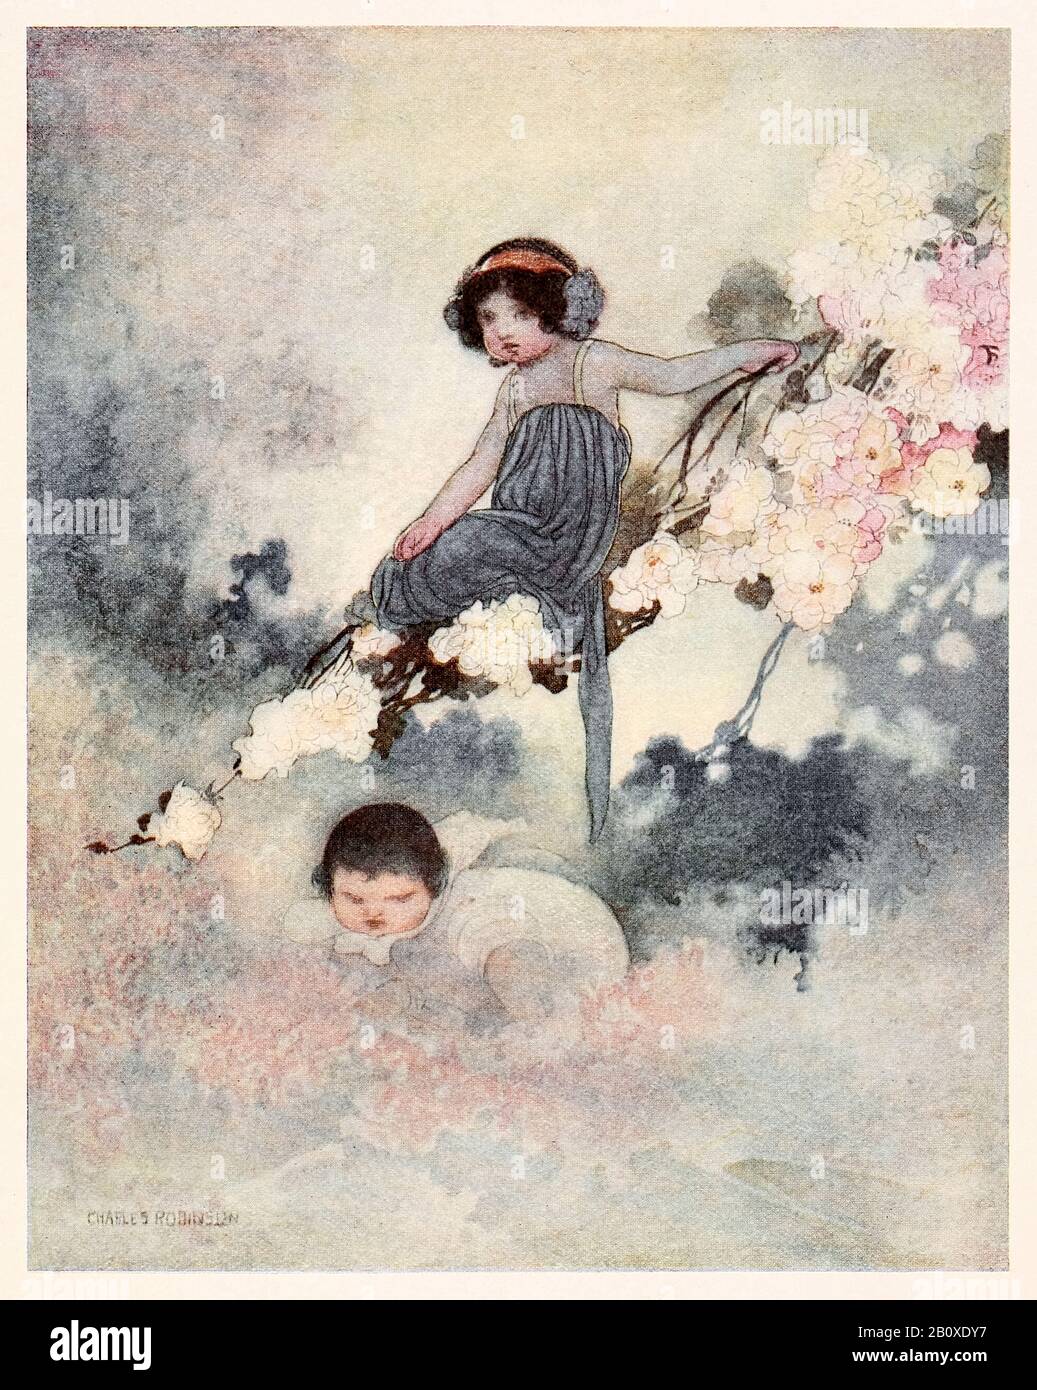 “In every tree he could see there was a little child” from ‘The Selfish Giant’ in The Happy Prince and Other Tales by Oscar Wilde (1854-1900) illustrated by Charles Robinson (1870-1937). See more information below. Stock Photo